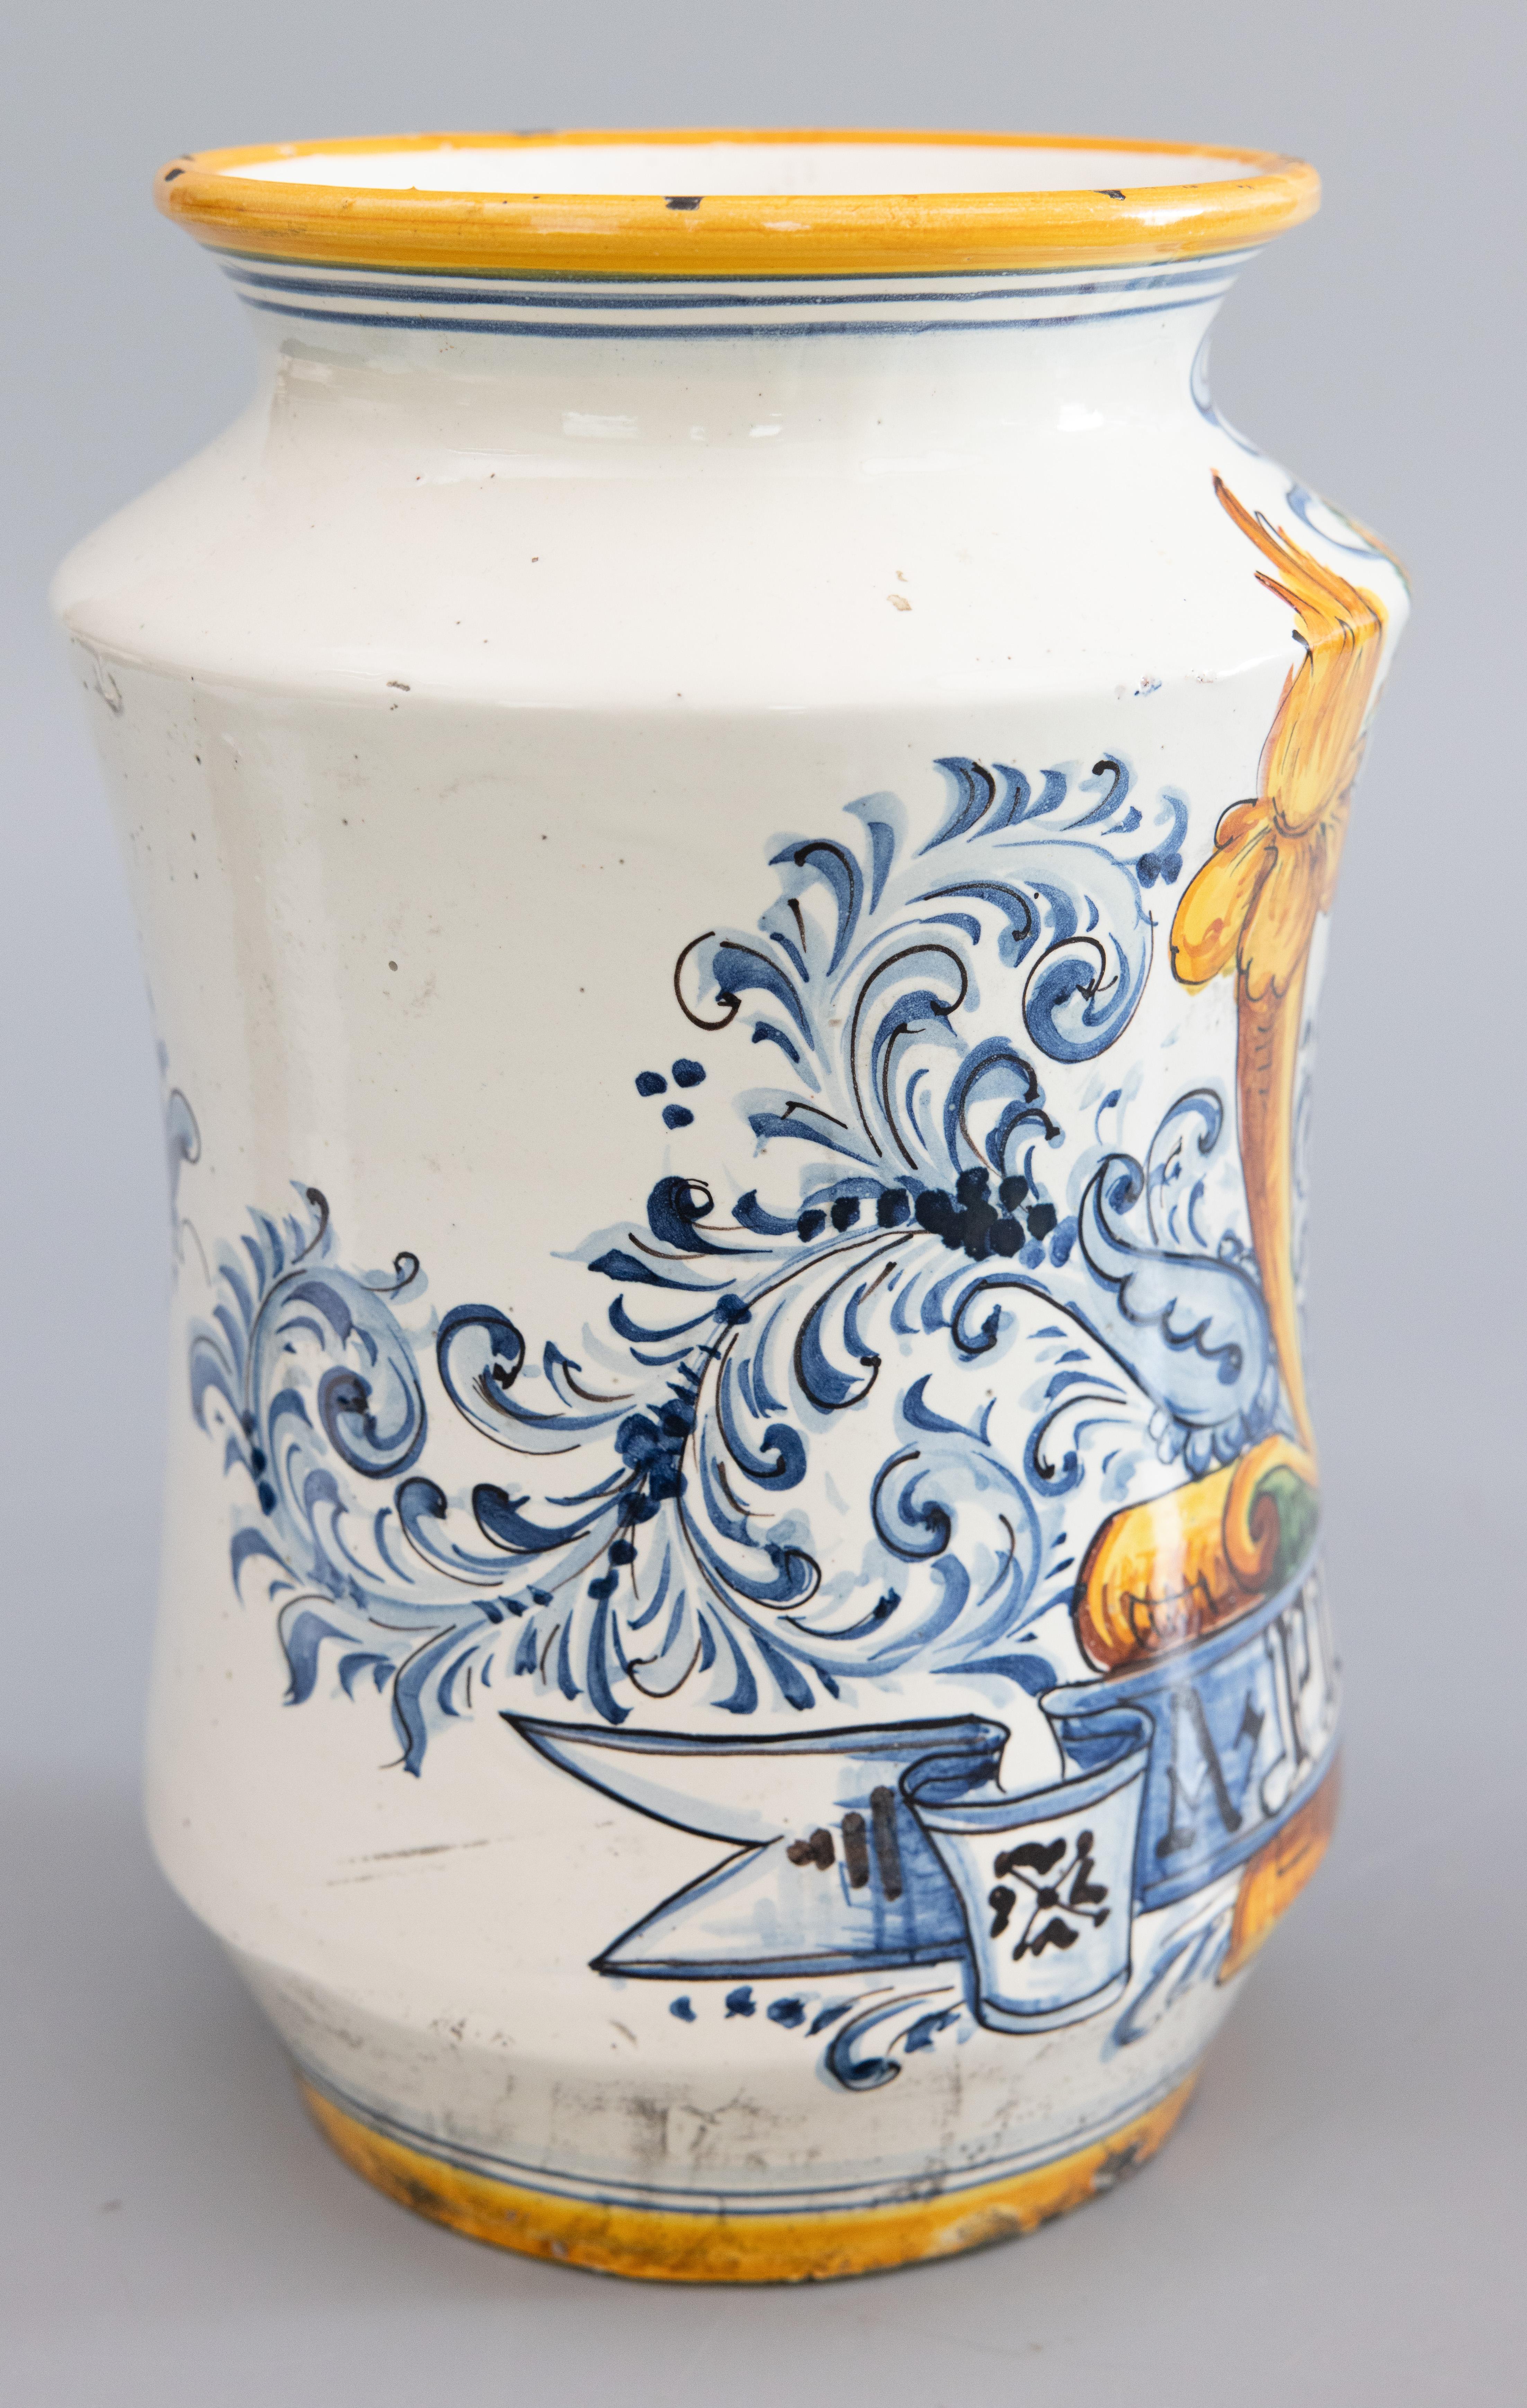 19th Century Italian Faience Albarello Apothecary Jar Vase In Good Condition For Sale In Pearland, TX